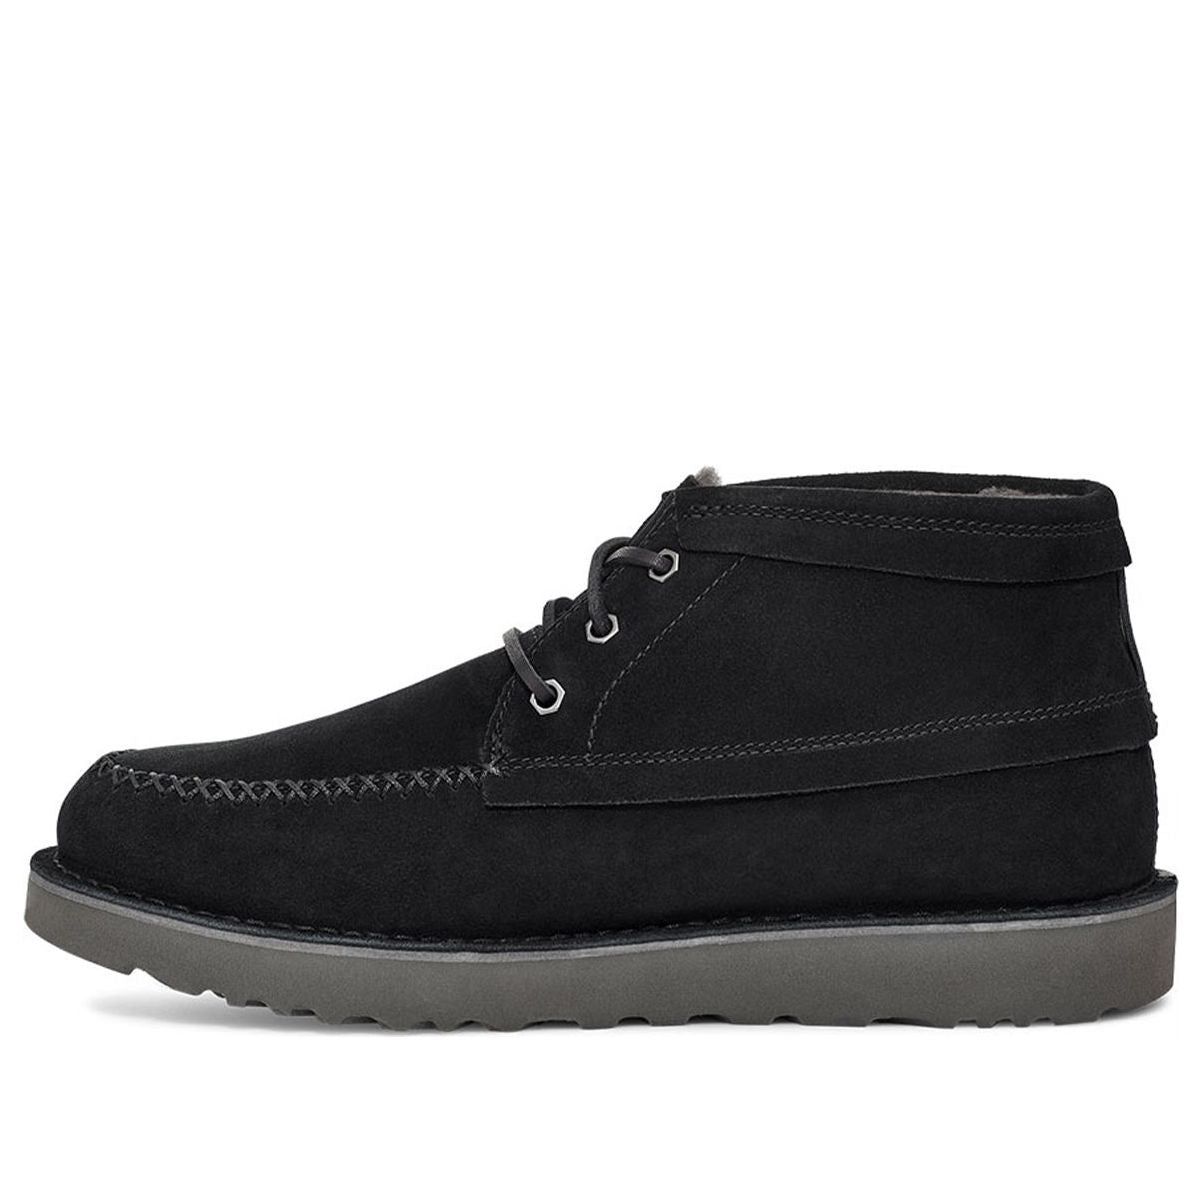 UGG, UGG Campout Chukka Low Top Casual Martin Stiefel schwarz 1112408-BLK